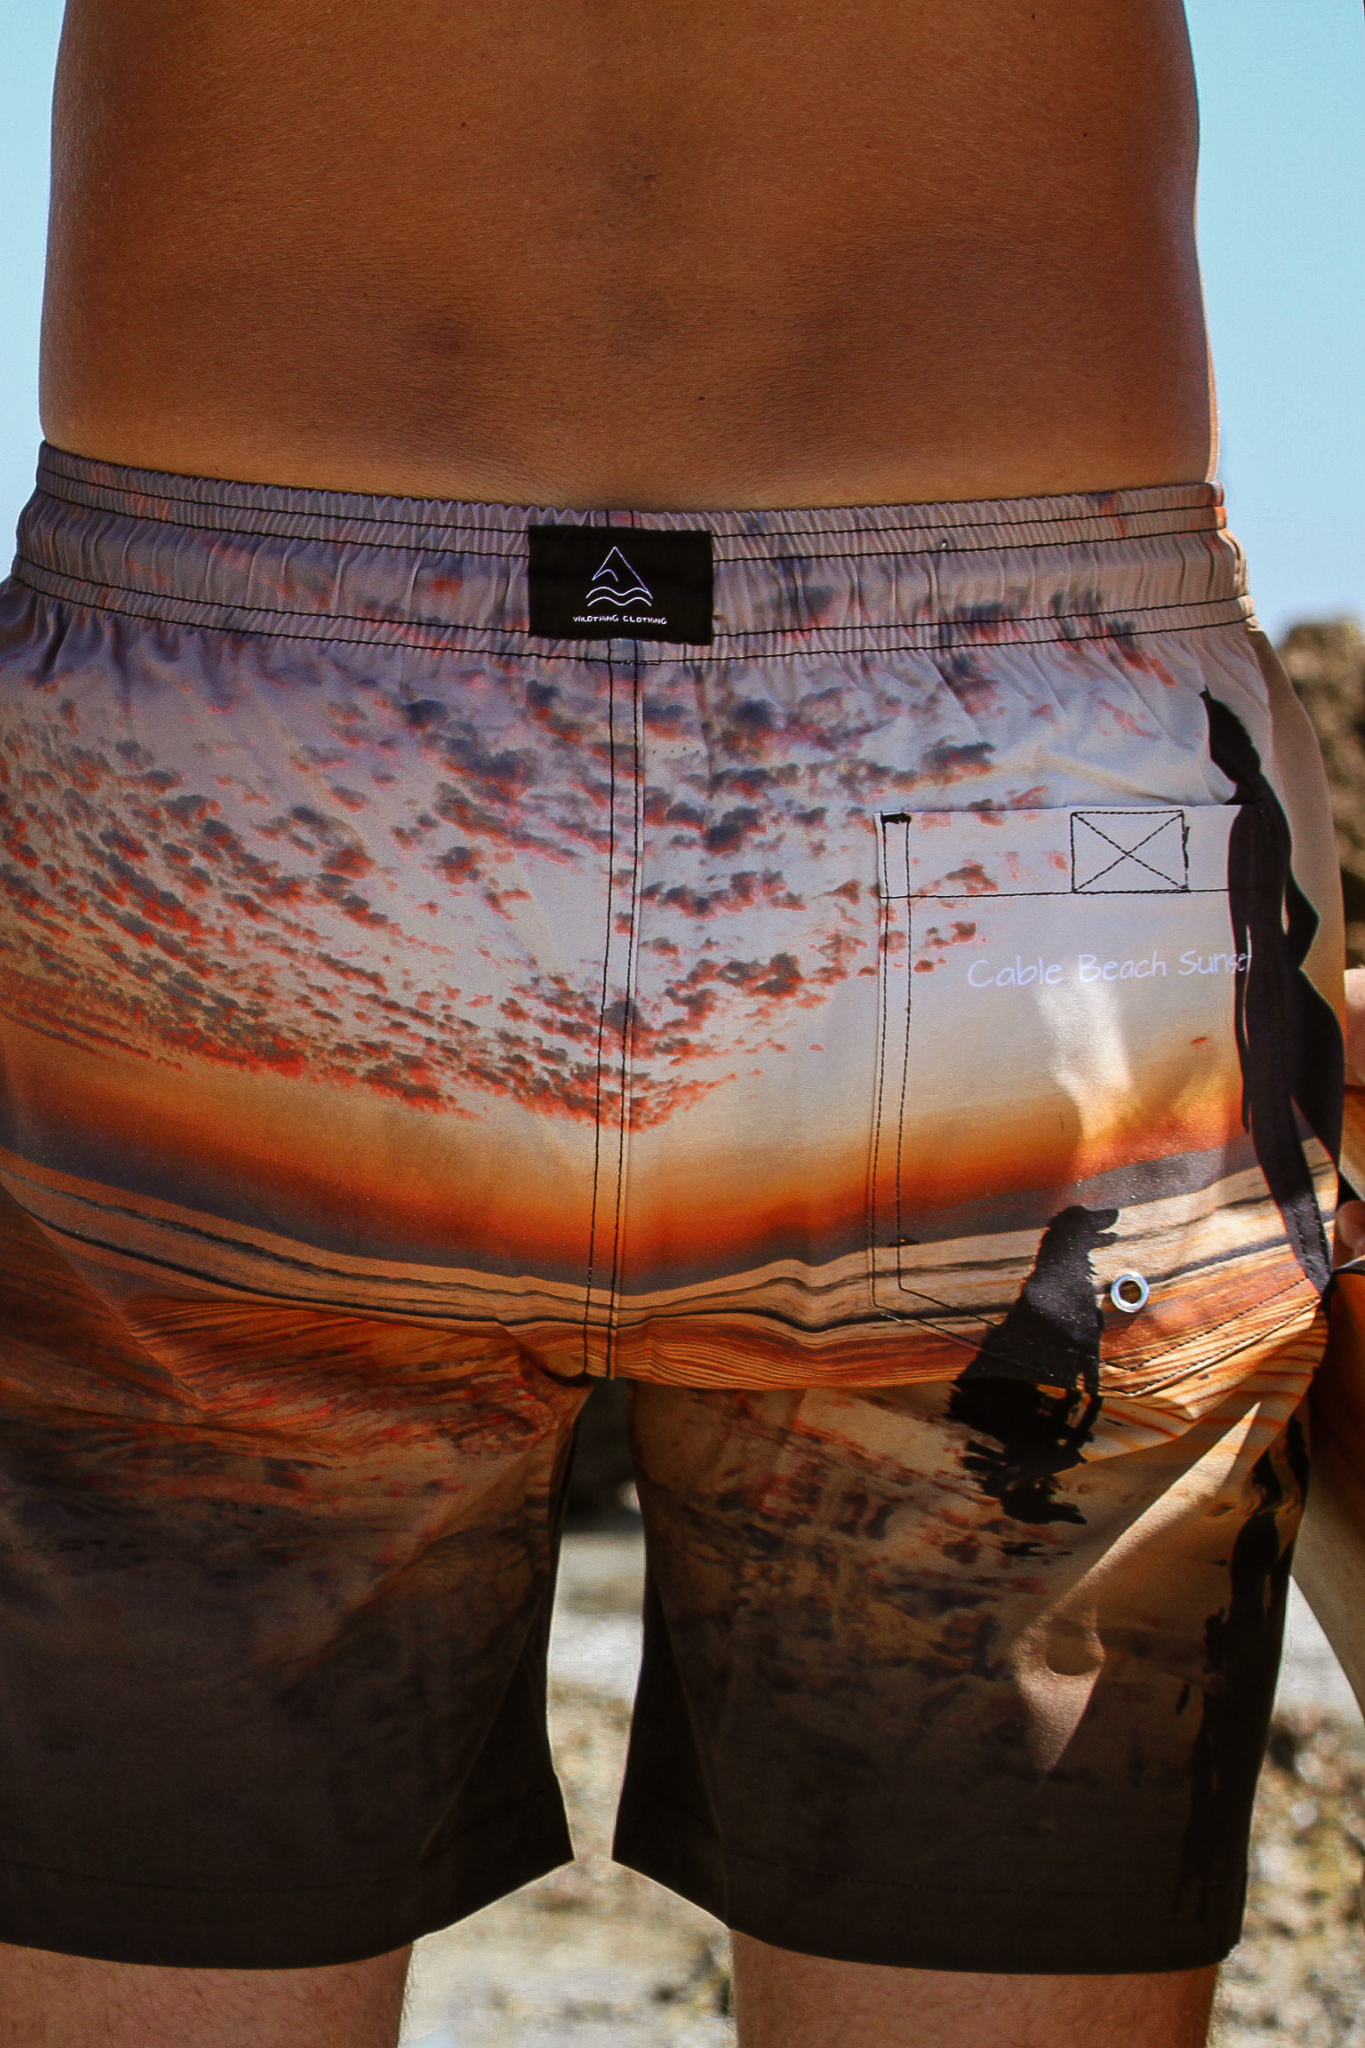 Cable Beach Sunset Recycled lifestyle short